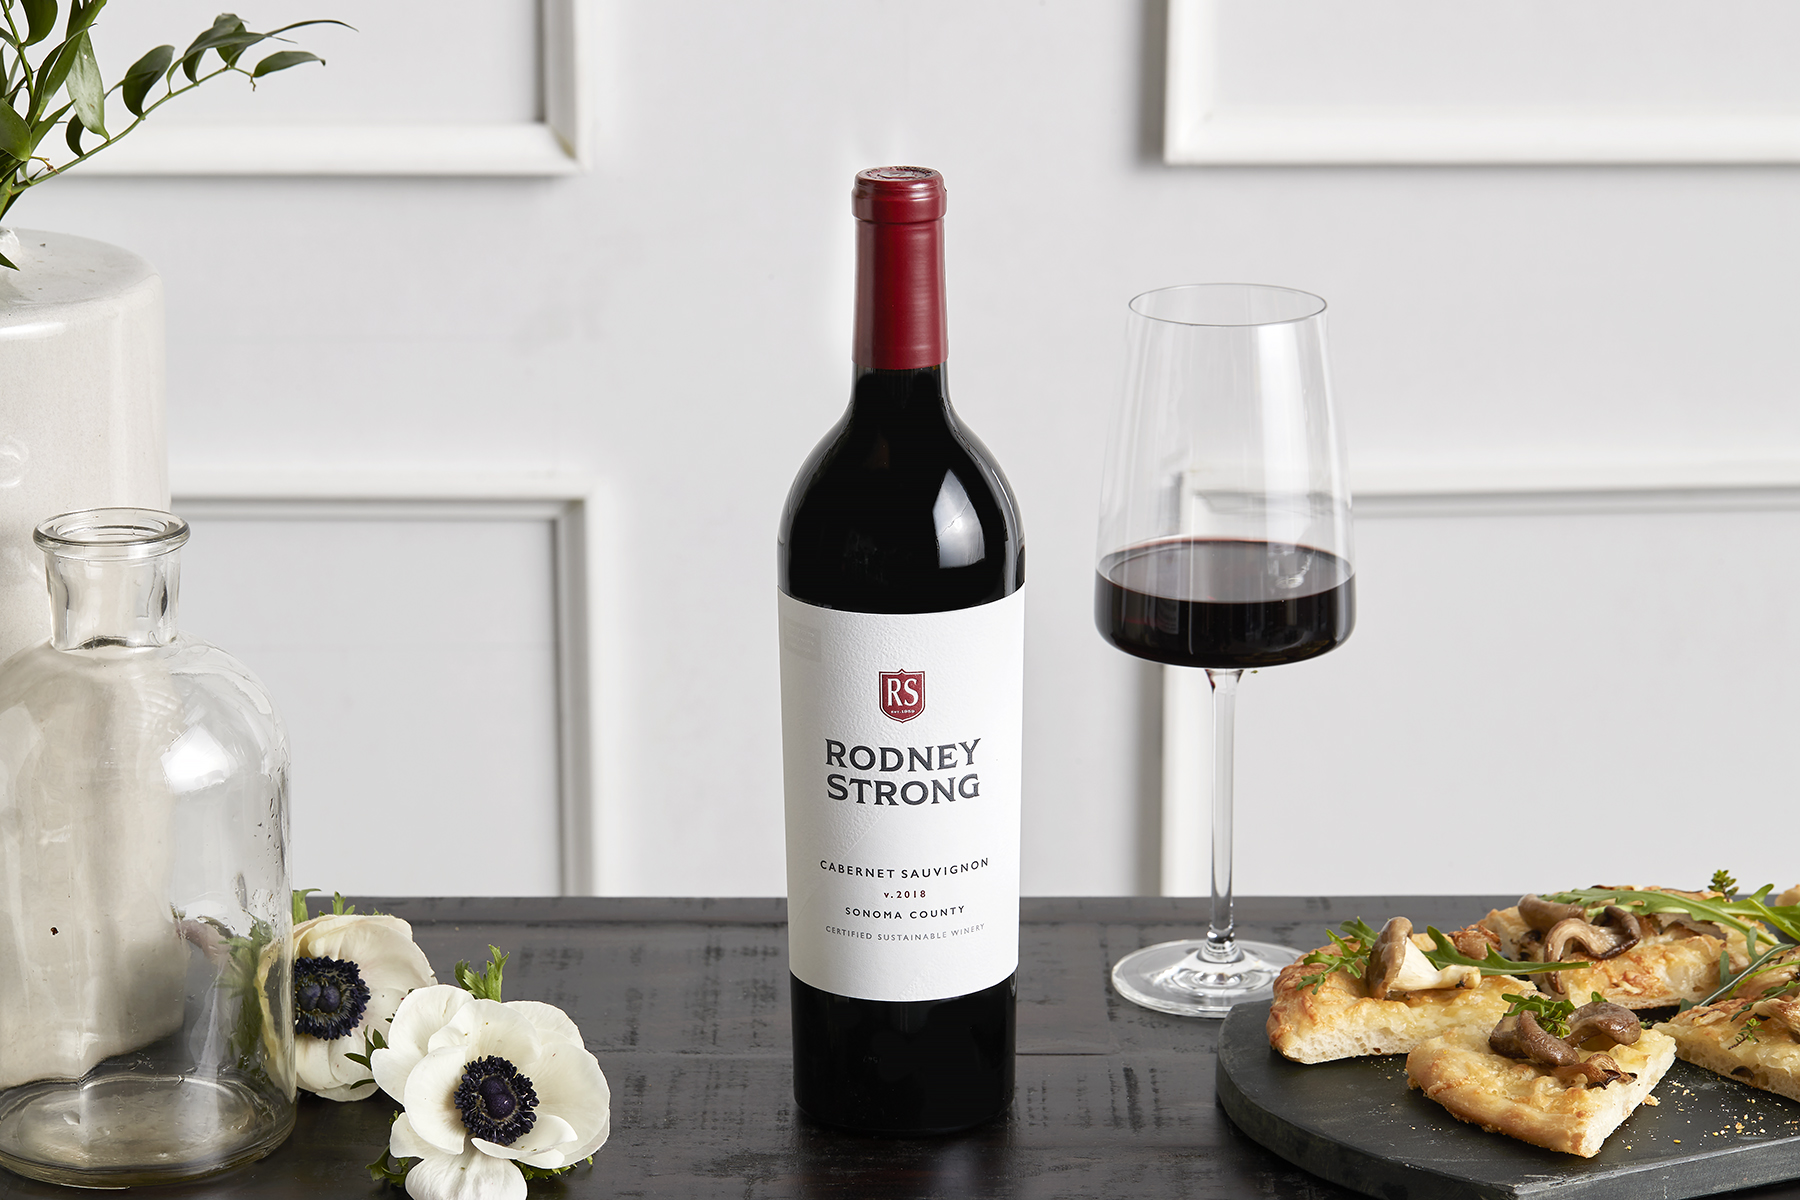 A bottle and wine glass of Sonoma County Cabernet on a table in front of a white wall with a vase of assorted flowers and a platter of wood-fired pizza